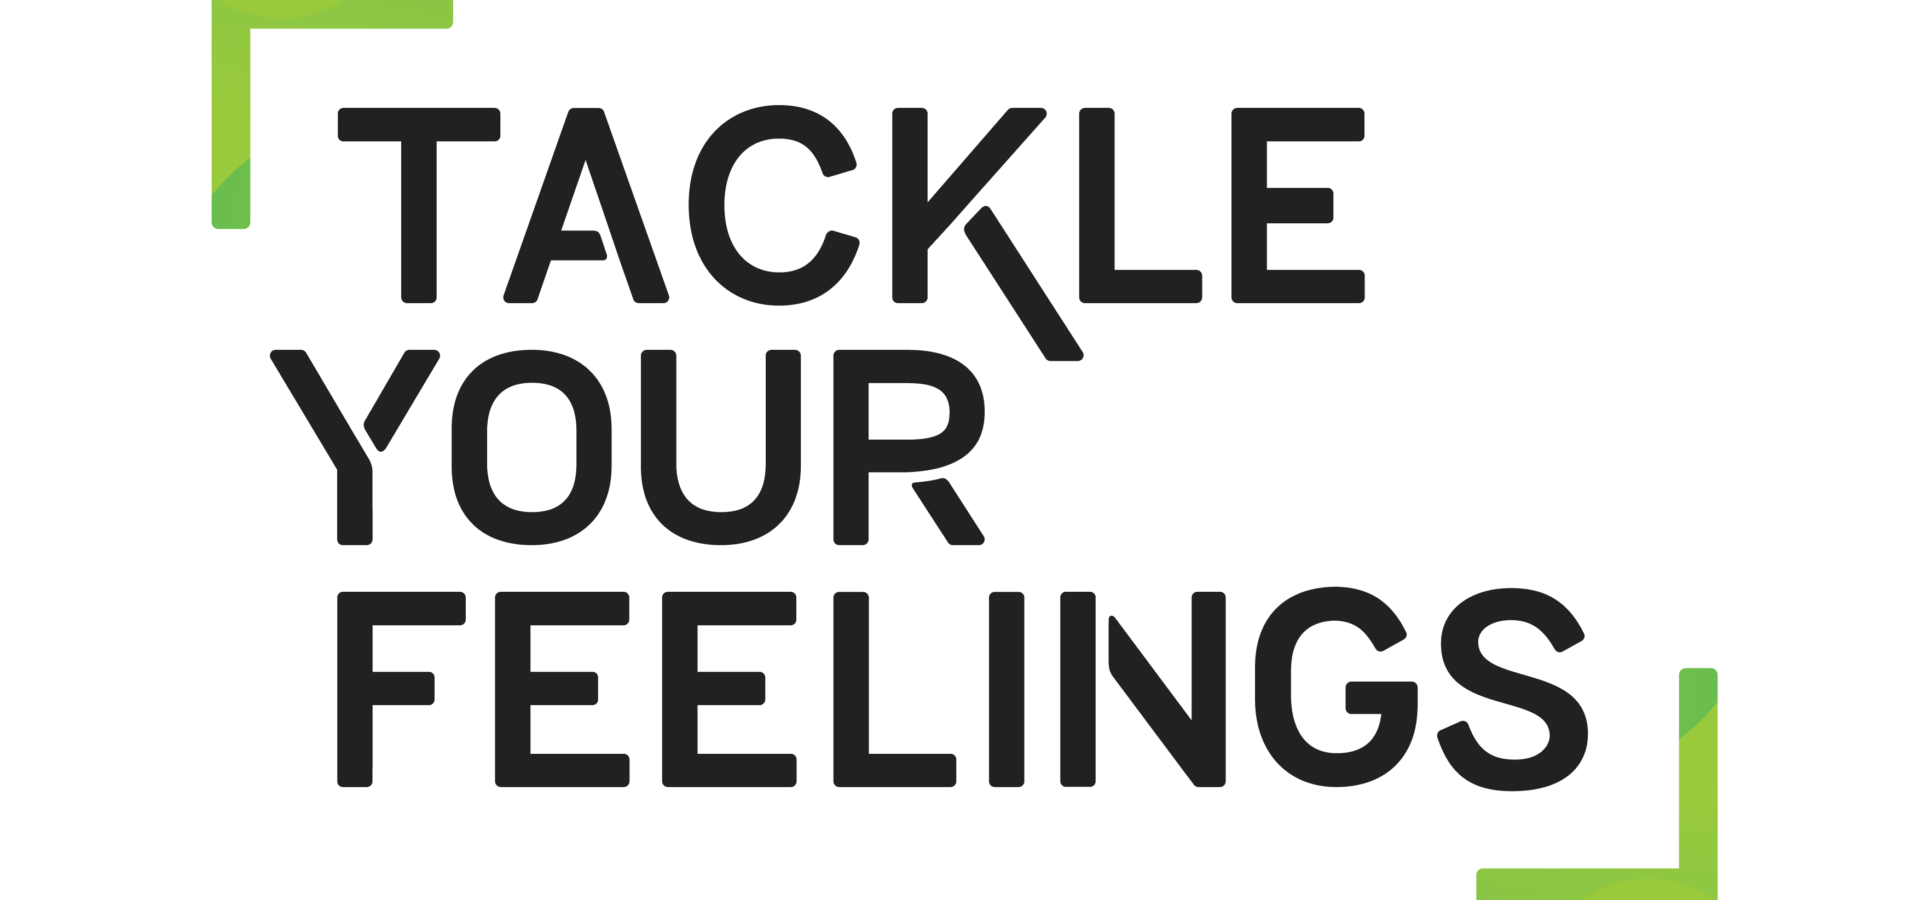 Job Opportunity: Tackle Your Feelings Campaign Manager (Maternity Cover)